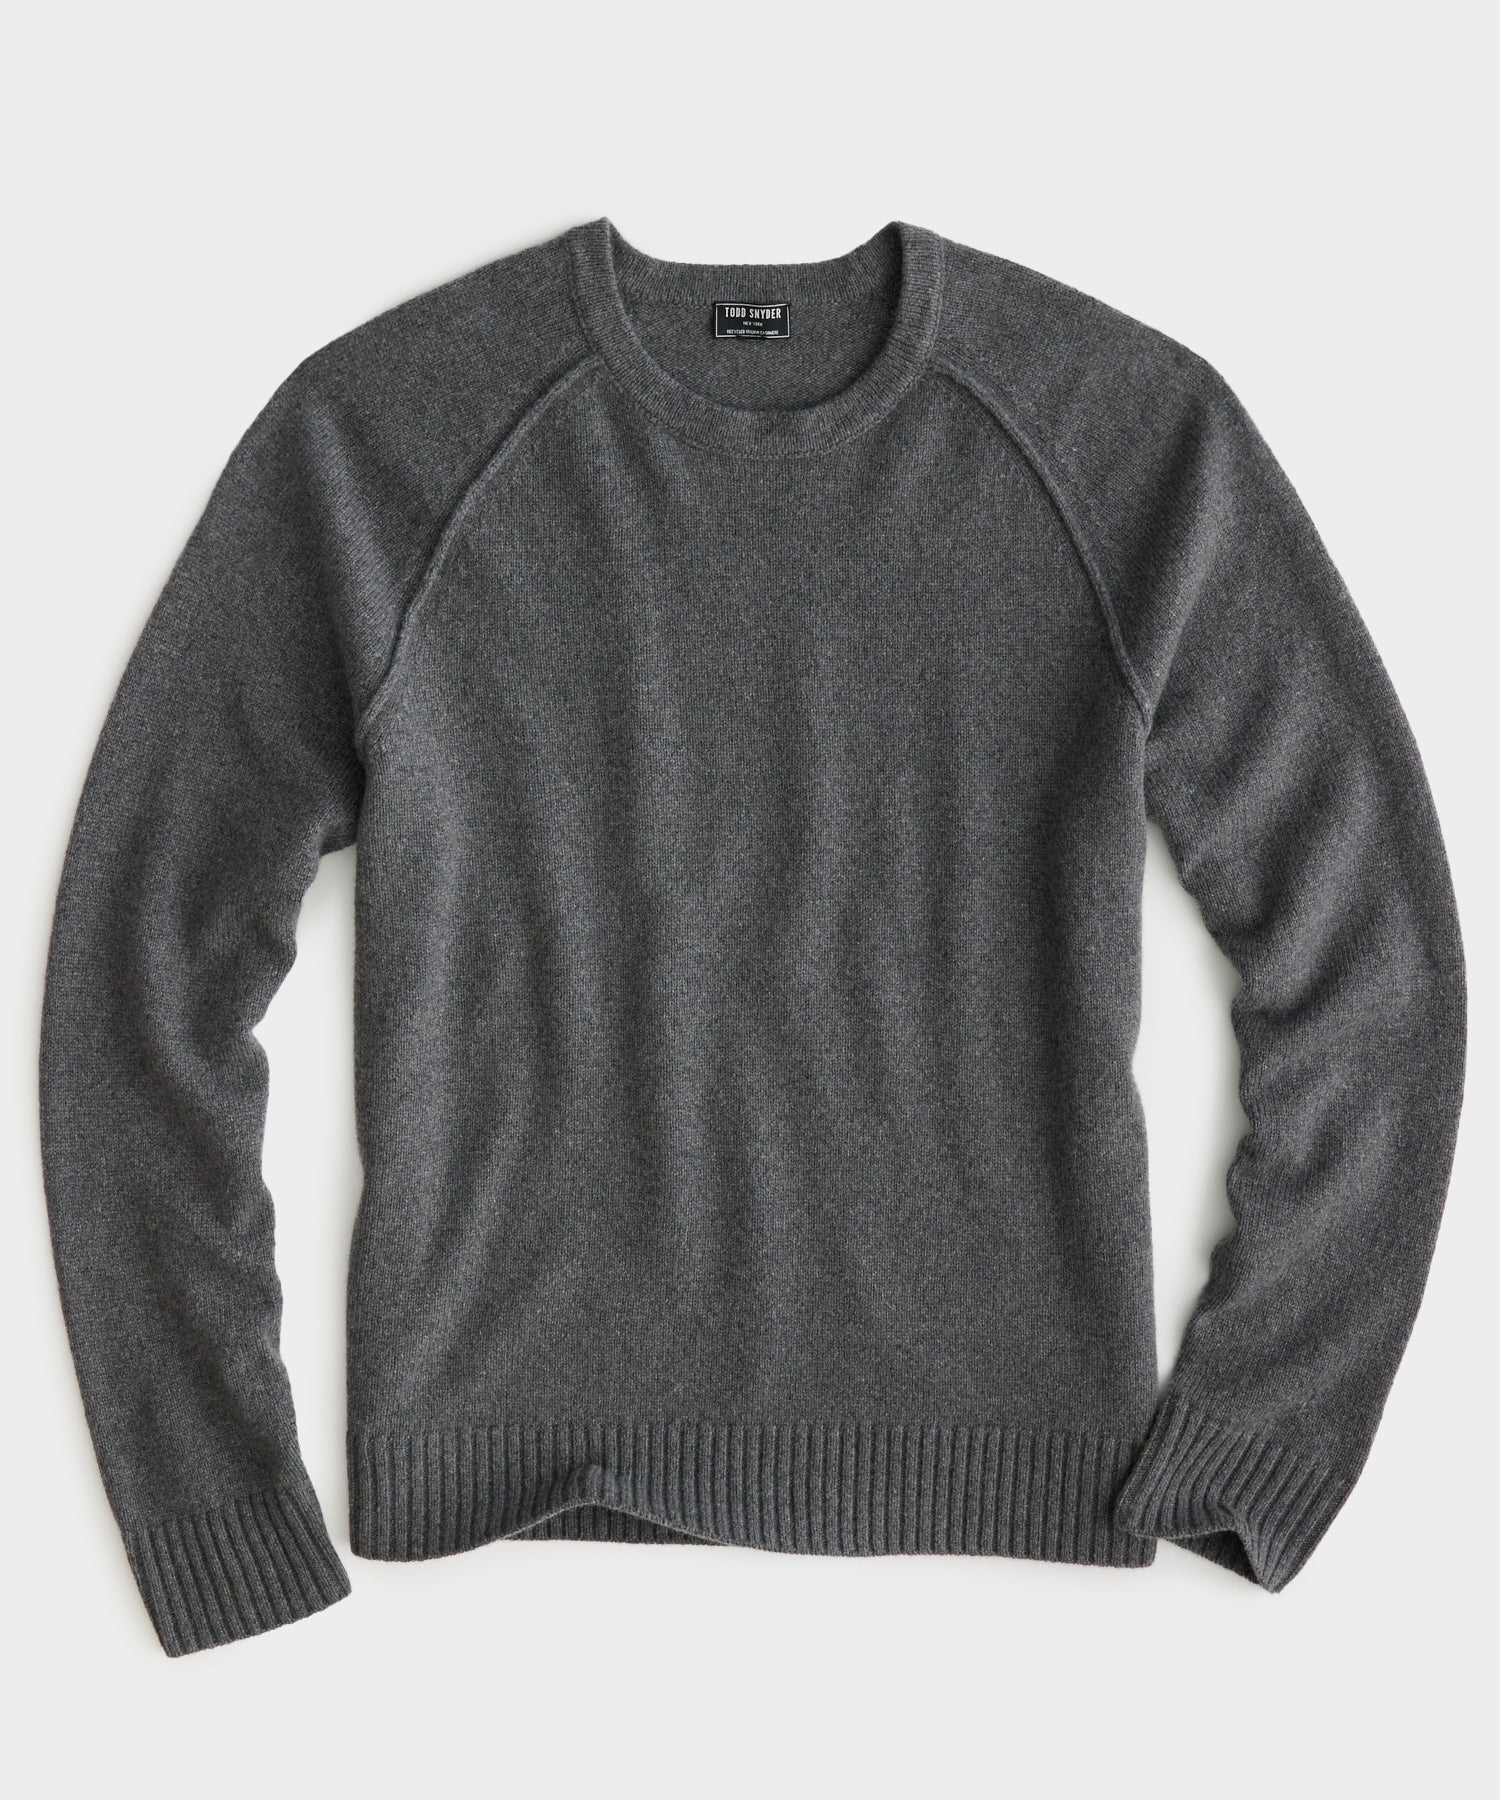 Nomad Cashmere Crewneck in Charcoal